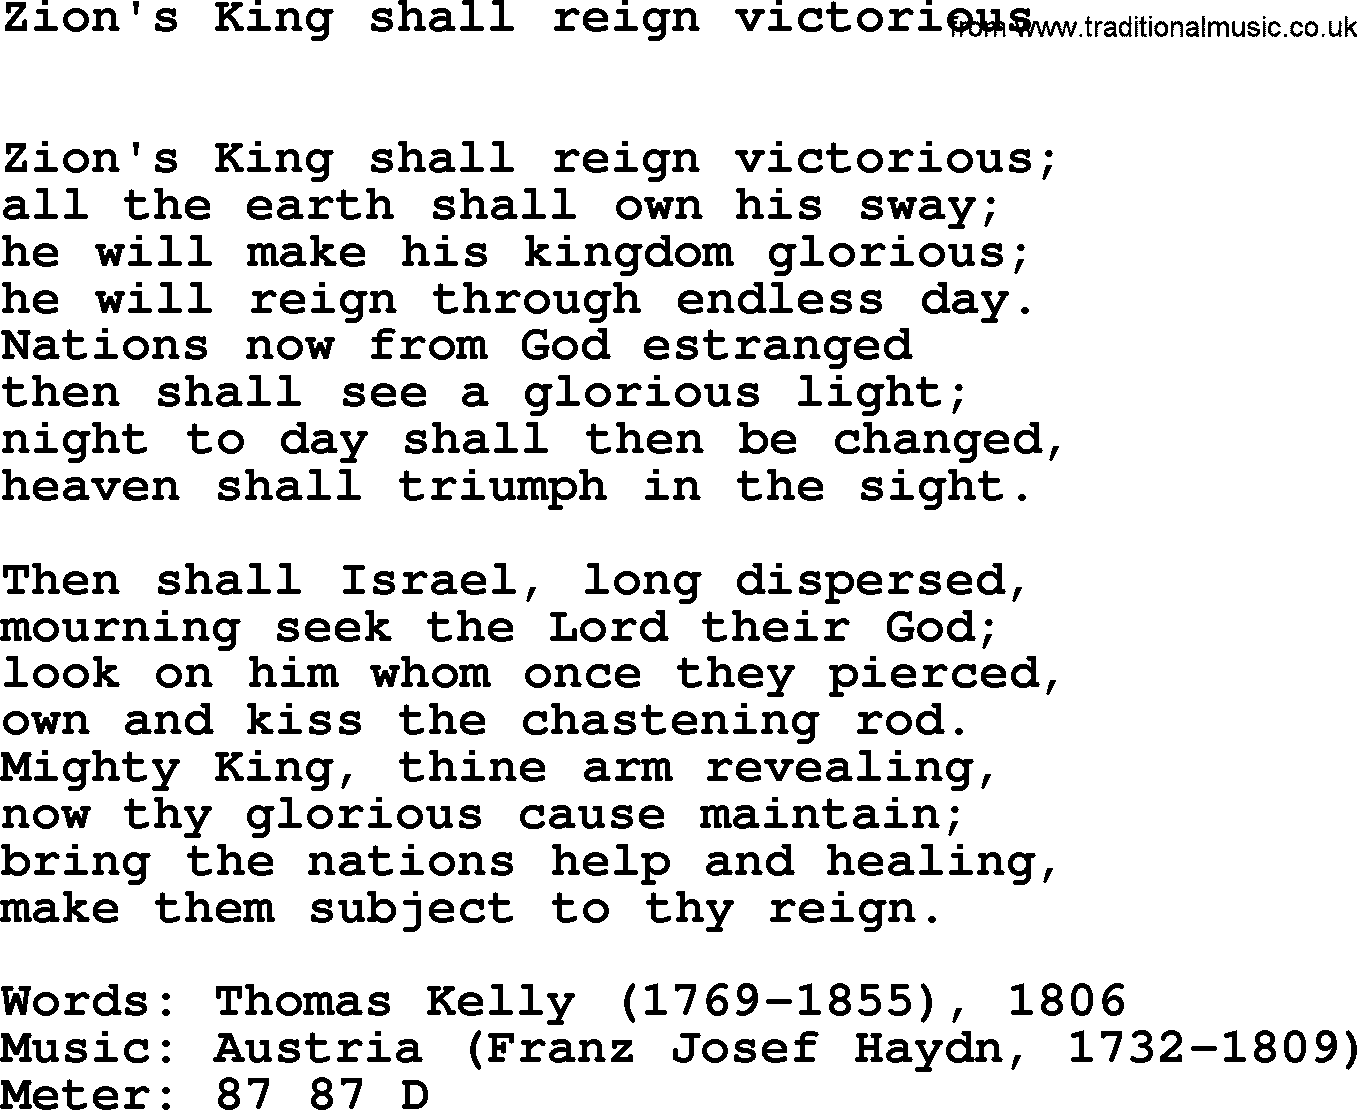 Book of Common Praise Hymn: Zion's King Shall Reign Victorious.txt lyrics with midi music